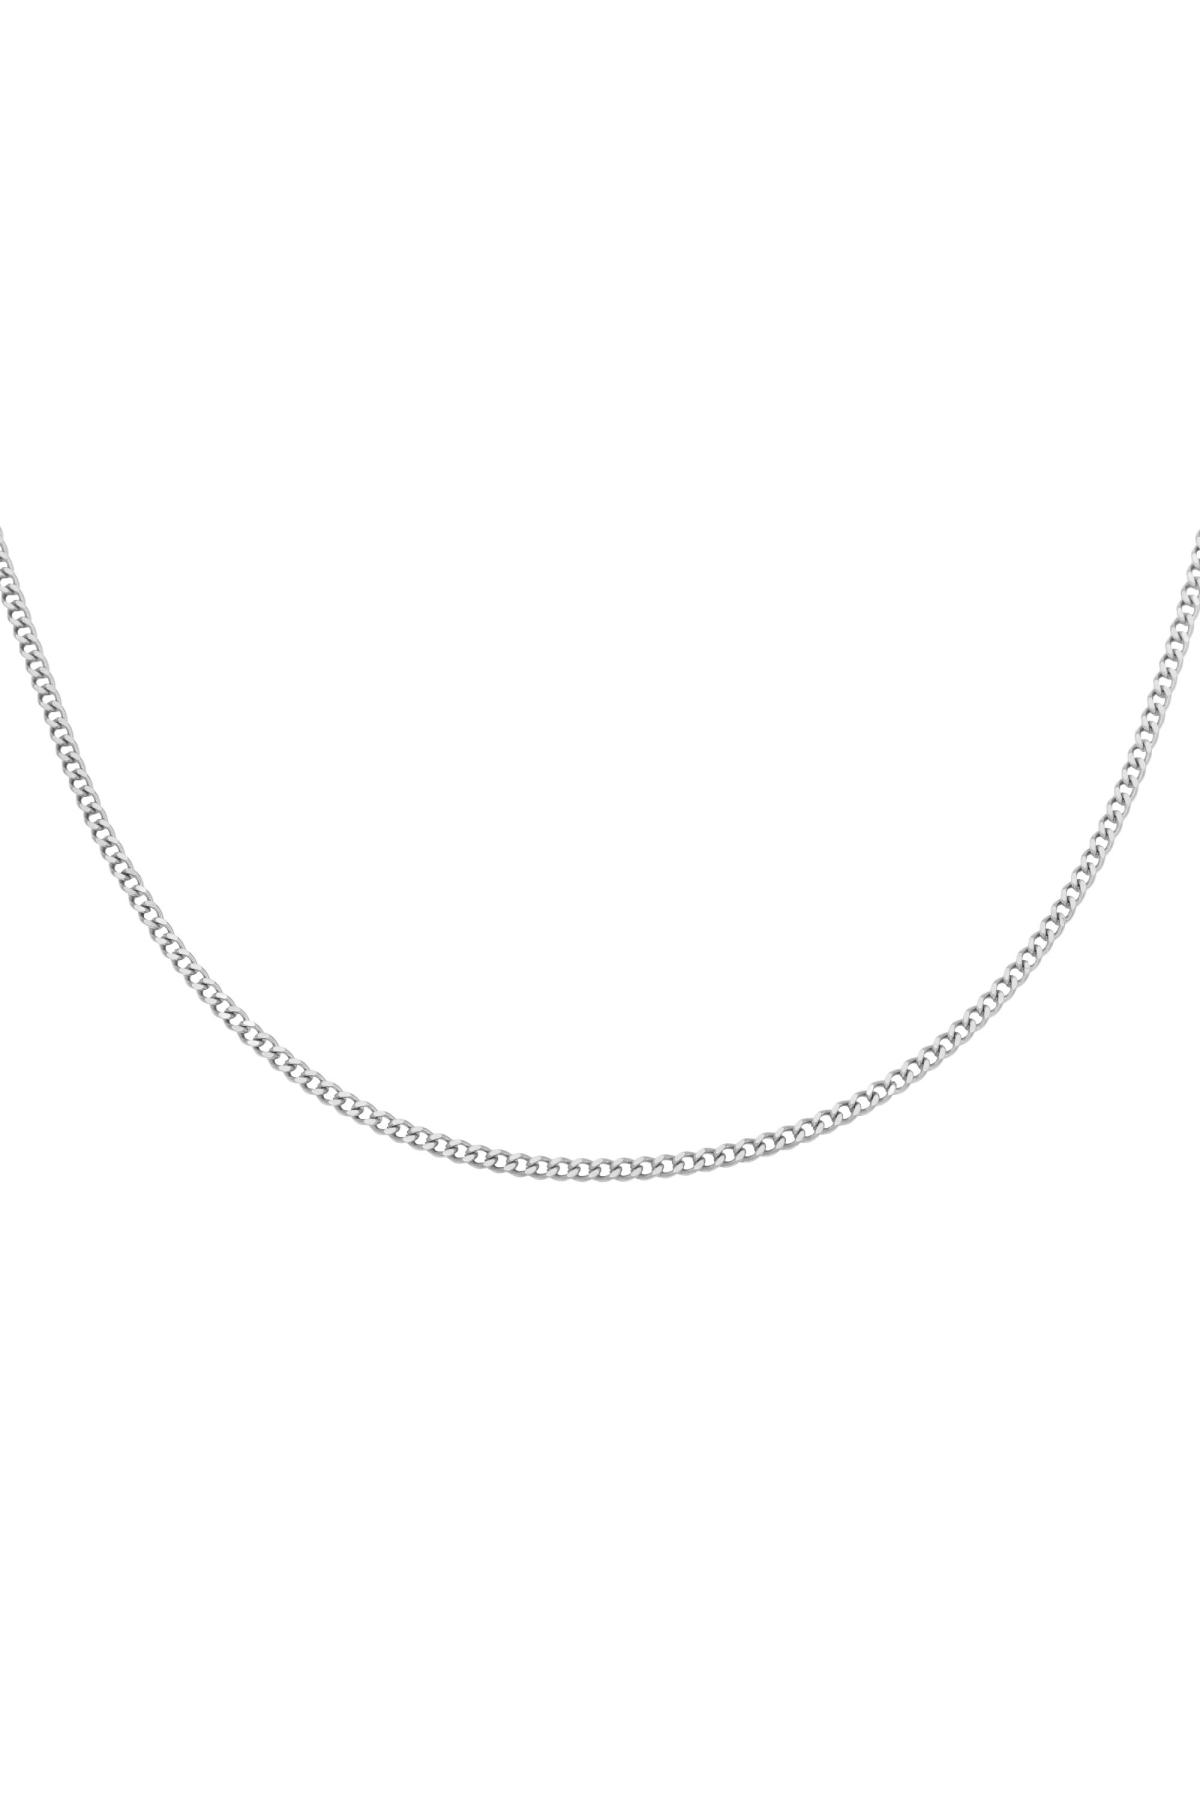 Silver / Necklace Tiny Plain Chains Silver Stainless Steel 